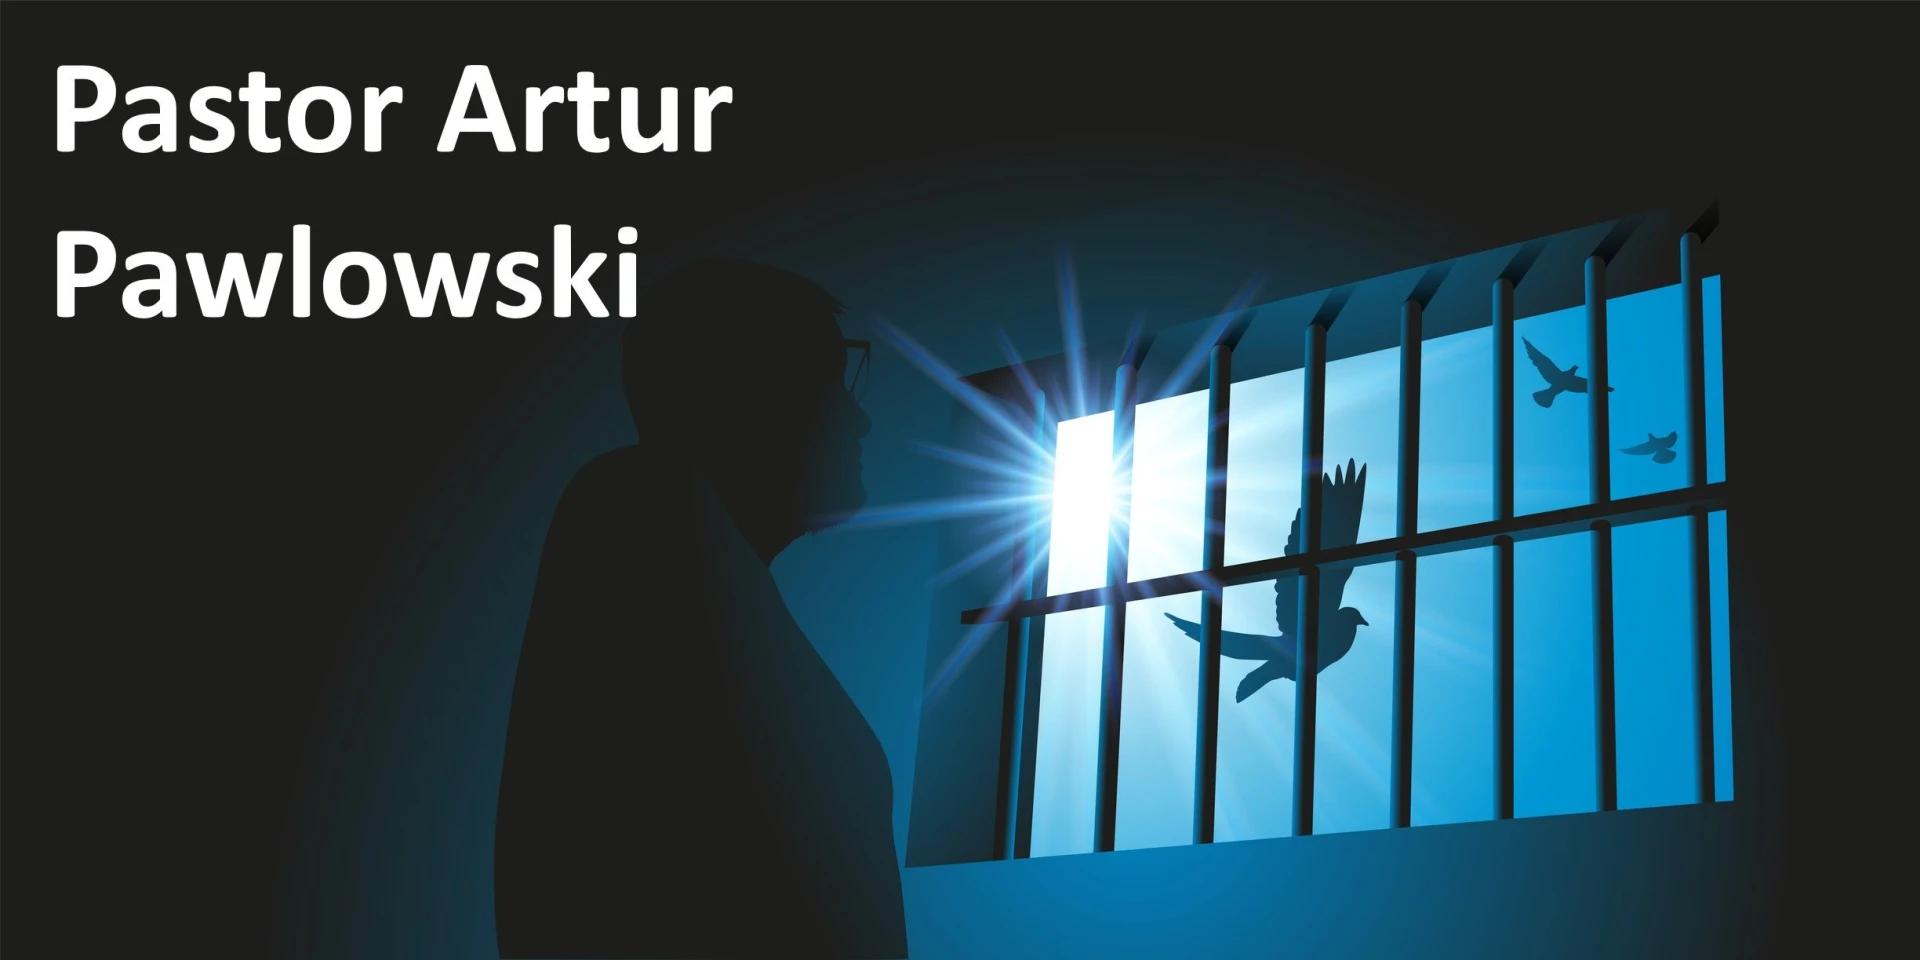 Pastor Artur Pawlowski vindicated after repeated arrests and 51 days in jail